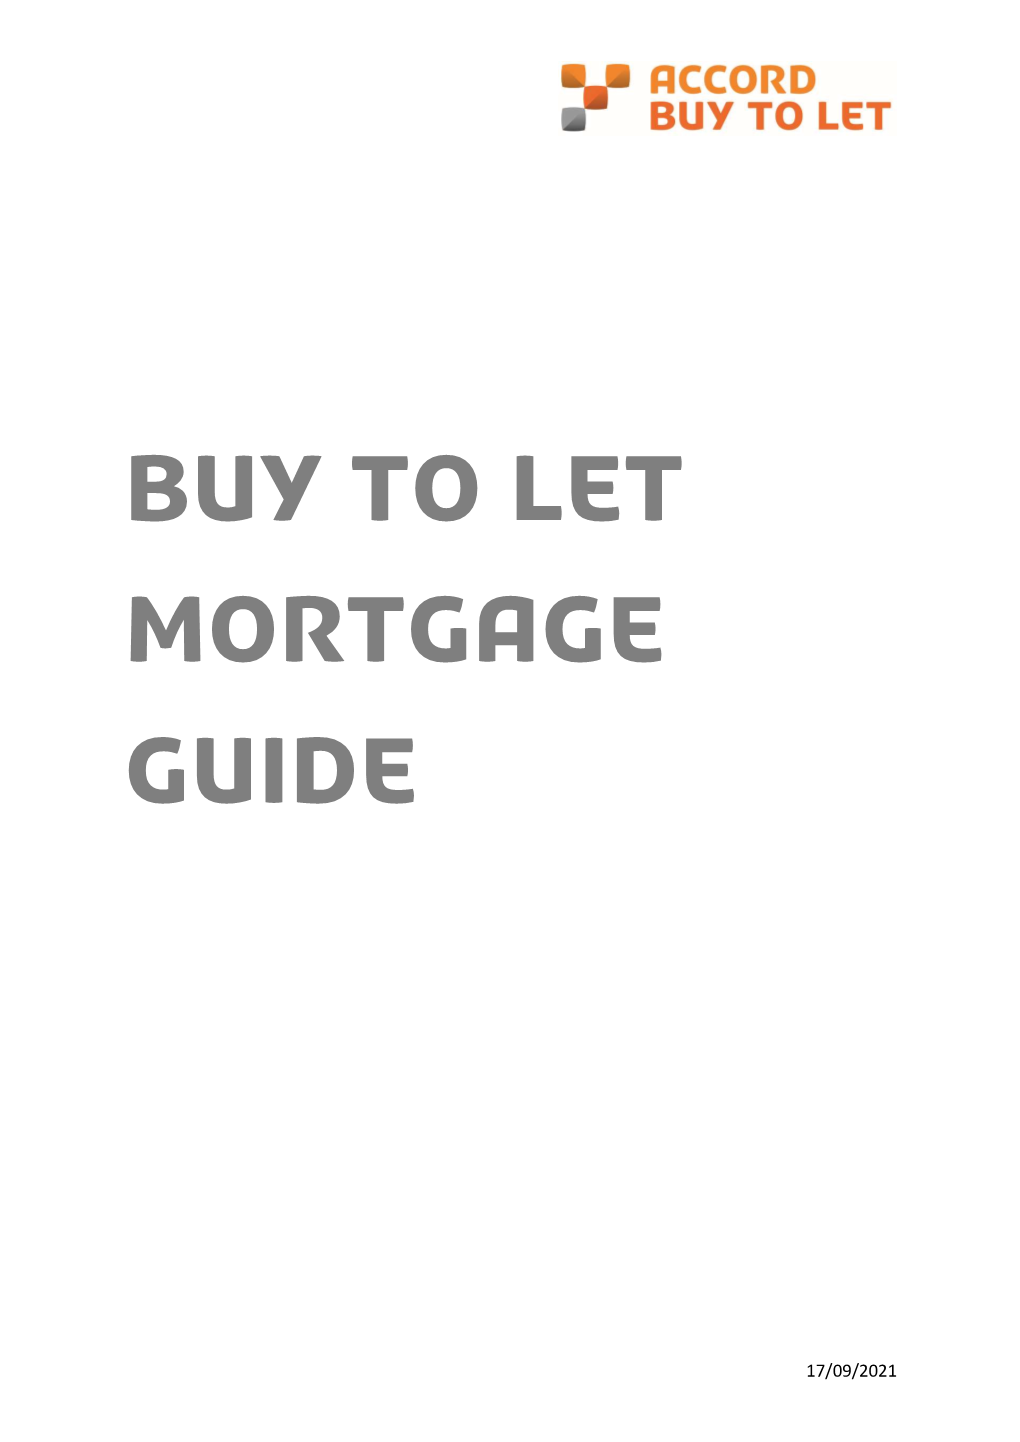 Buy to Let Mortgage Guide